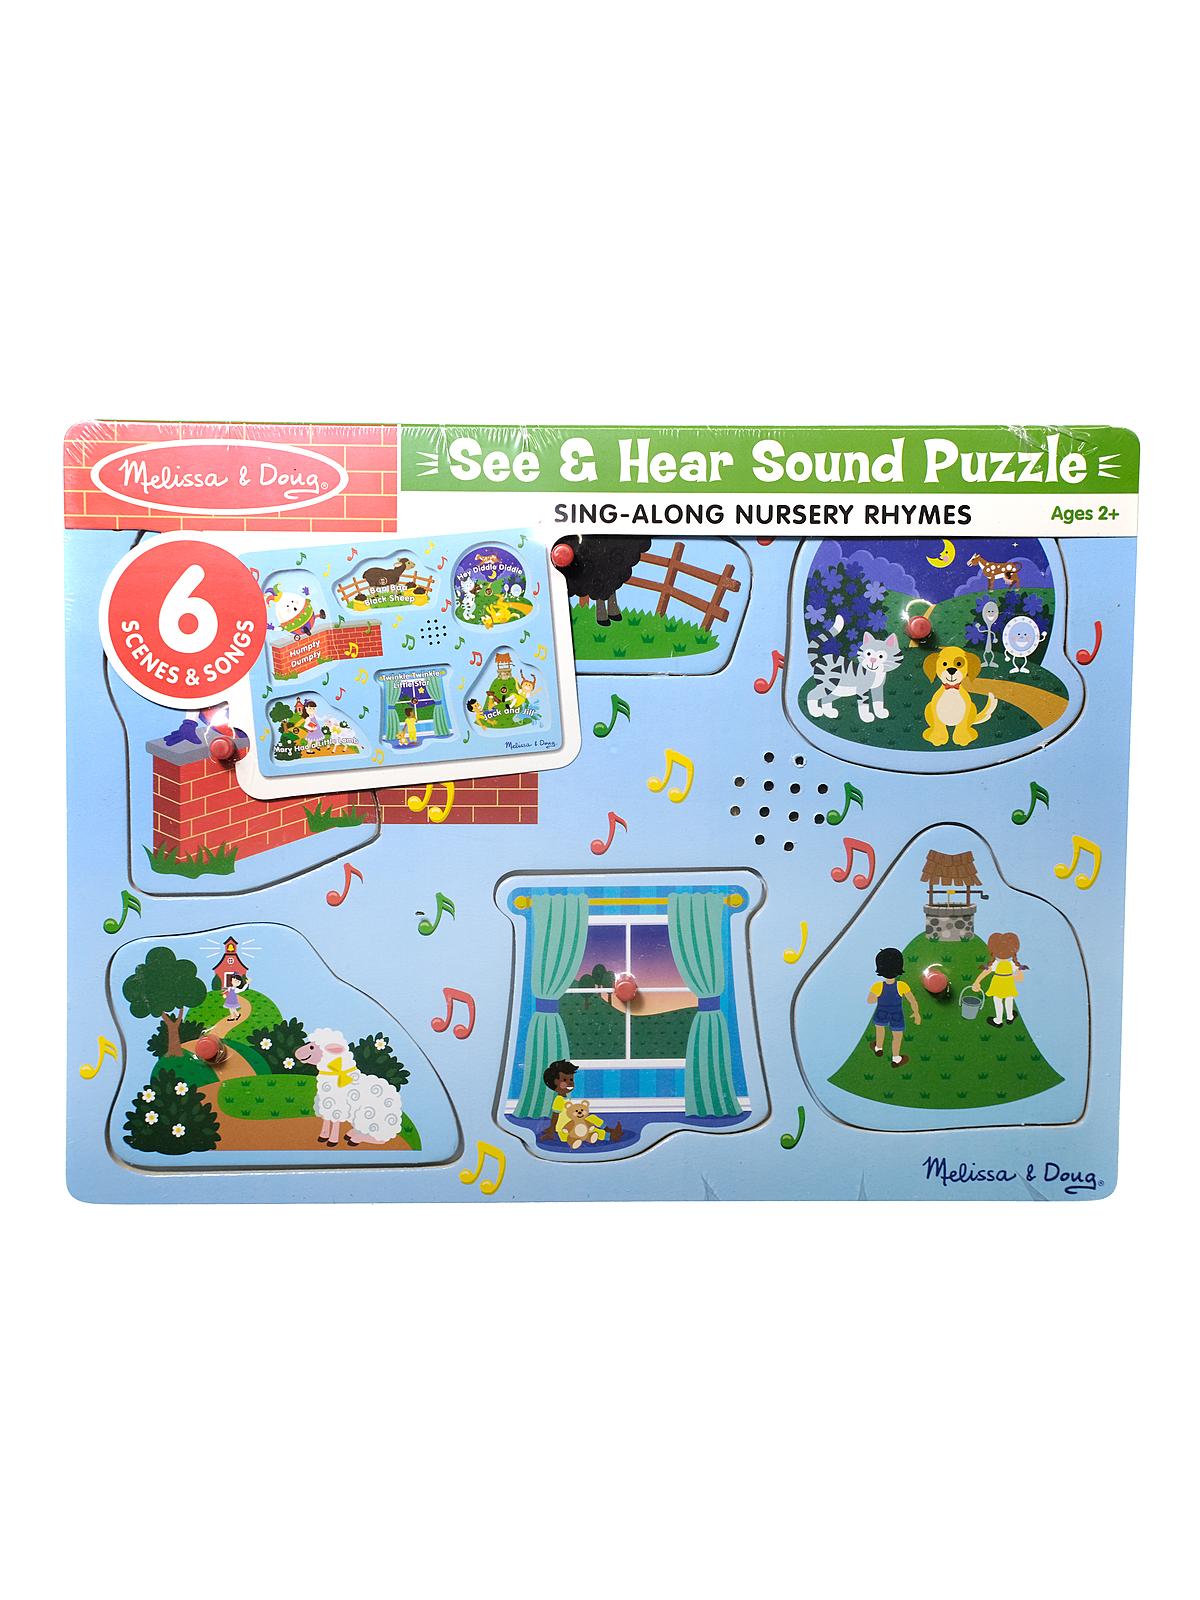 Sound Puzzles Sing-Along Nursery Rhymes 2 6 Pieces